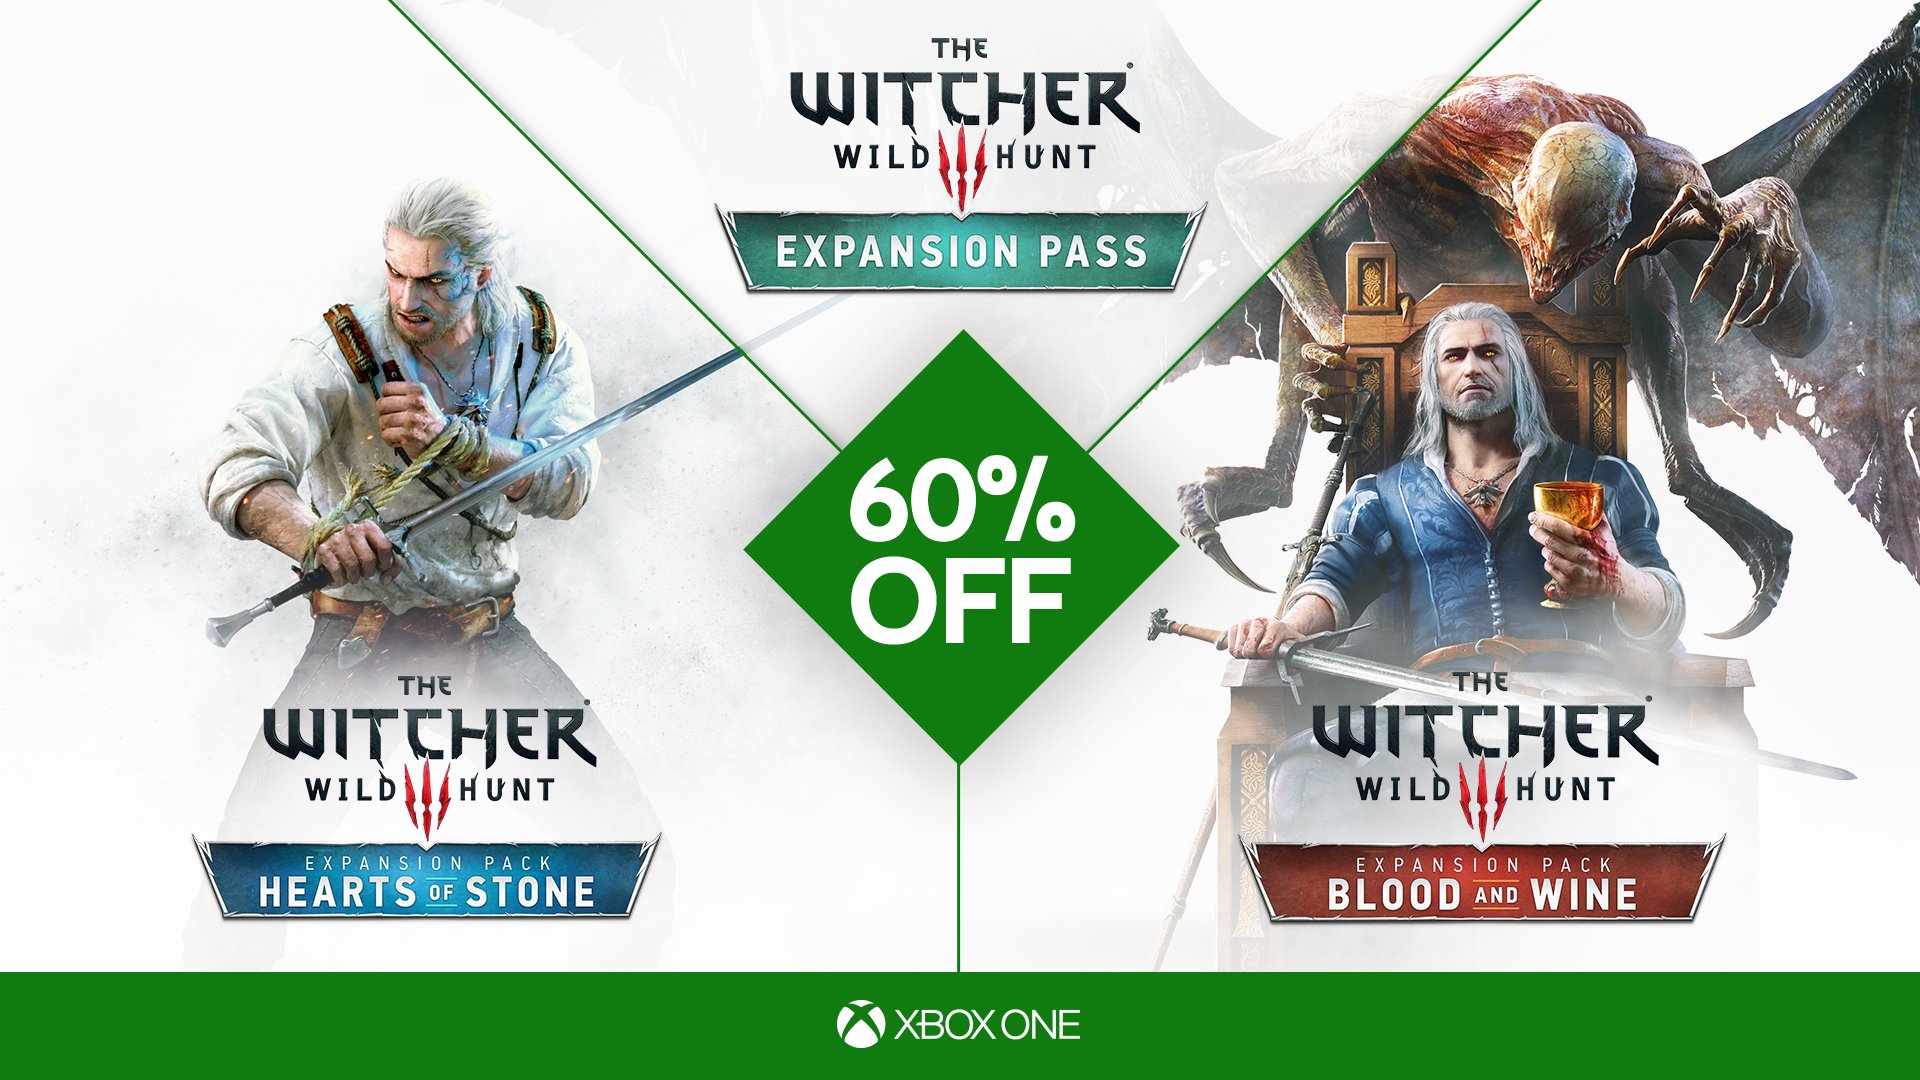 Console code the witcher 3 фото 56